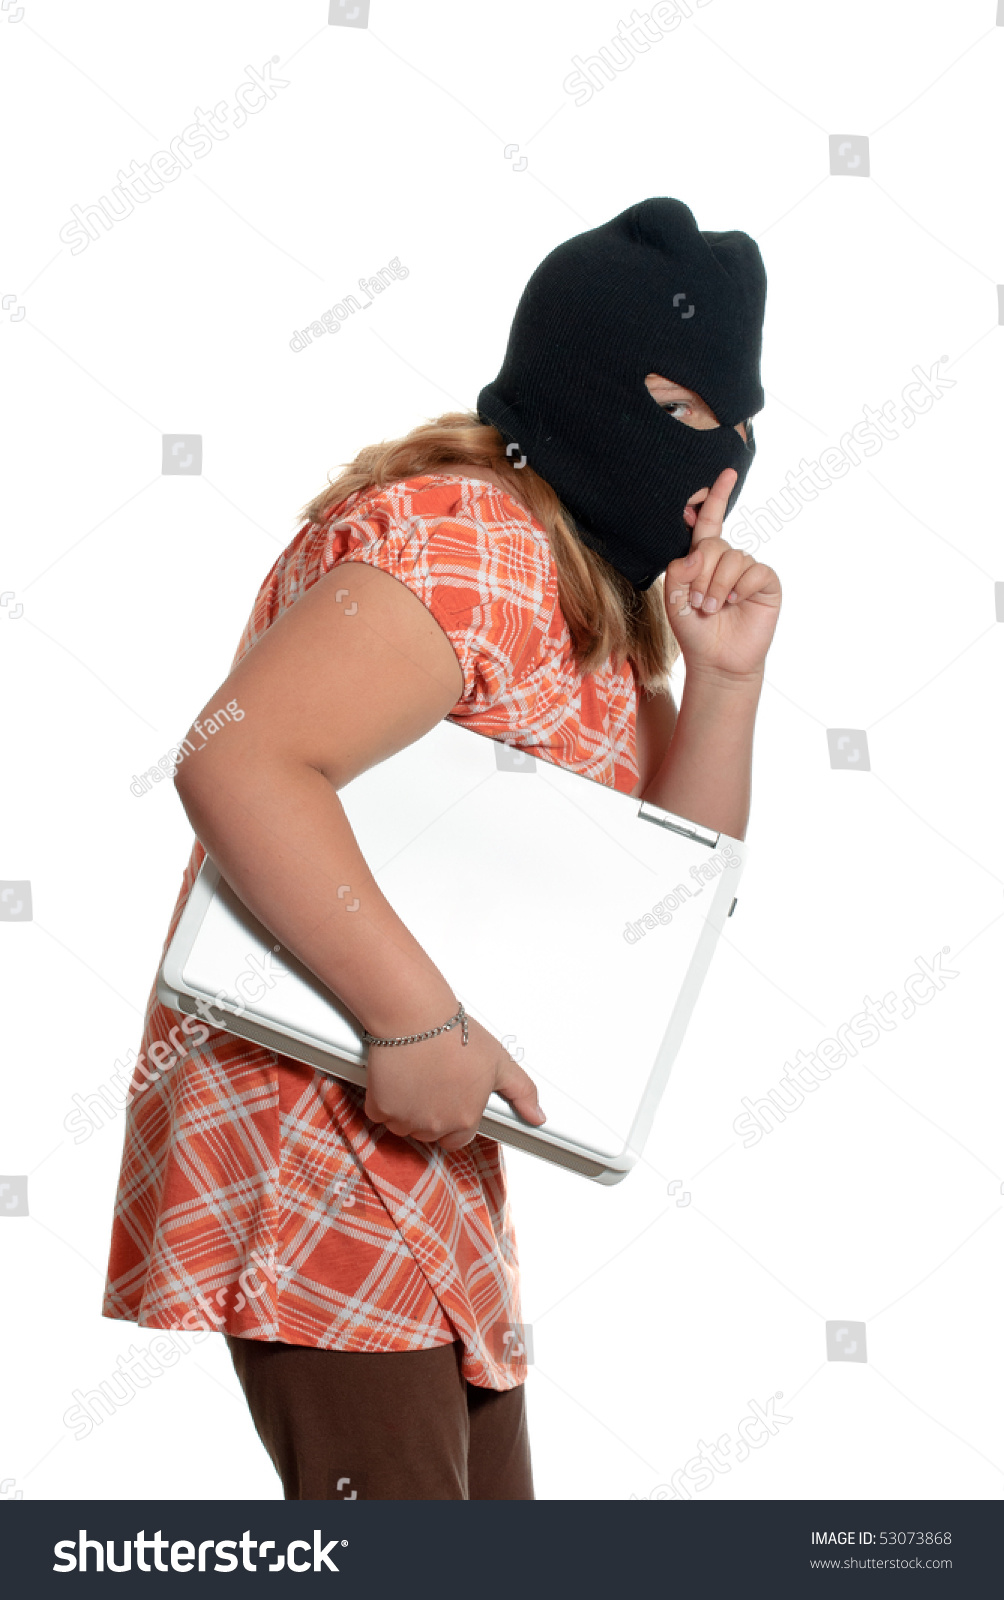 stock-photo-a-young-girl-is-stealing-a-l